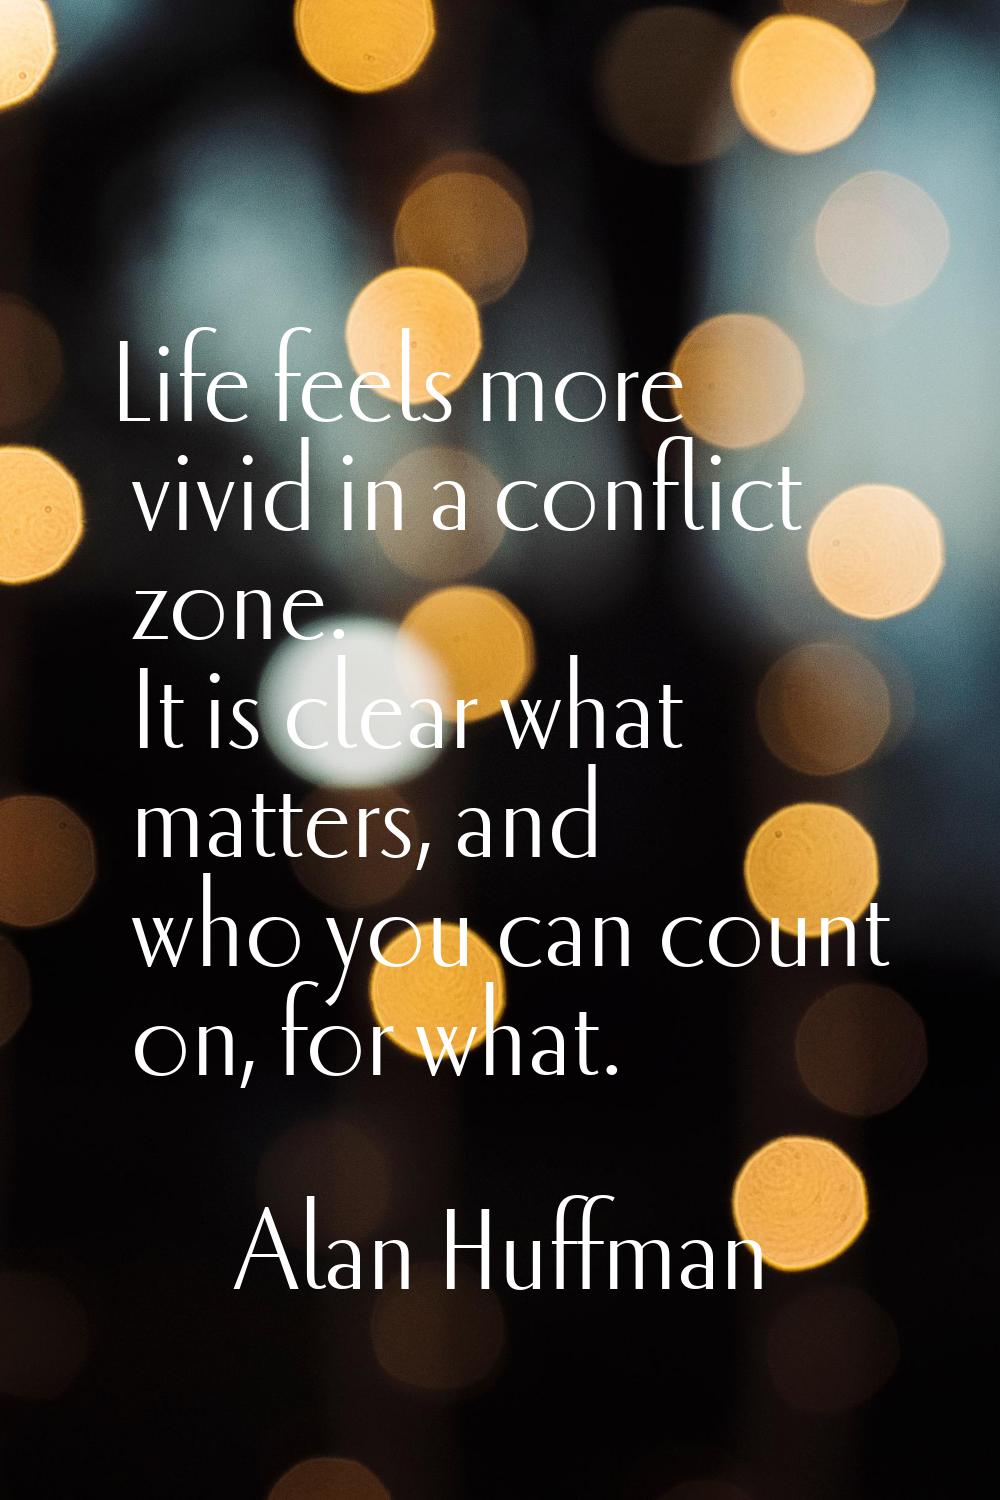 Life feels more vivid in a conflict zone. It is clear what matters, and who you can count on, for w